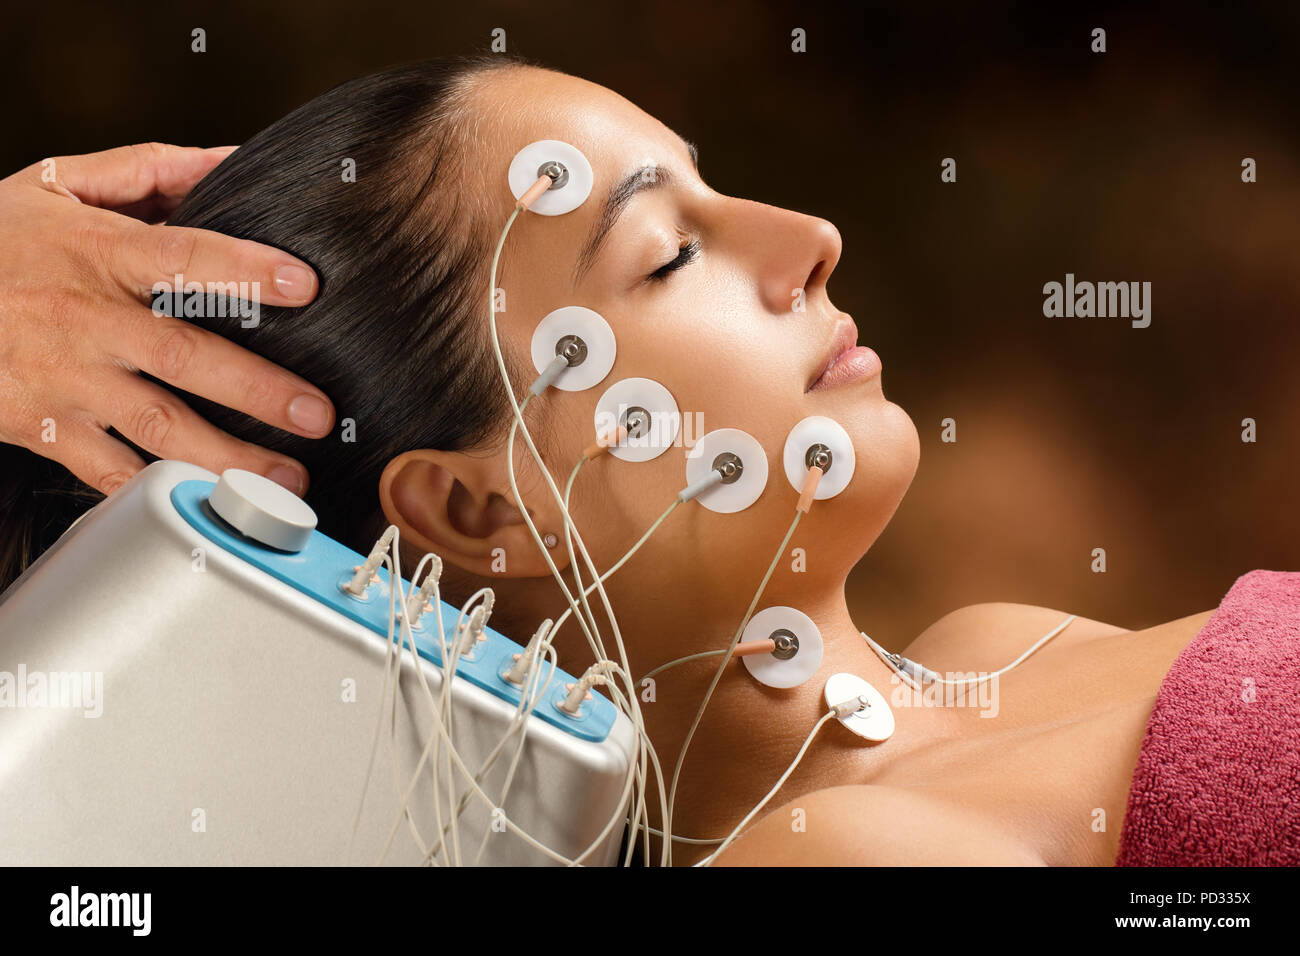 Close up portrait of woman having skin tightening treatment with low frequency electrodes. Hypo allergenic pads placed on woman’s face. Stock Photo